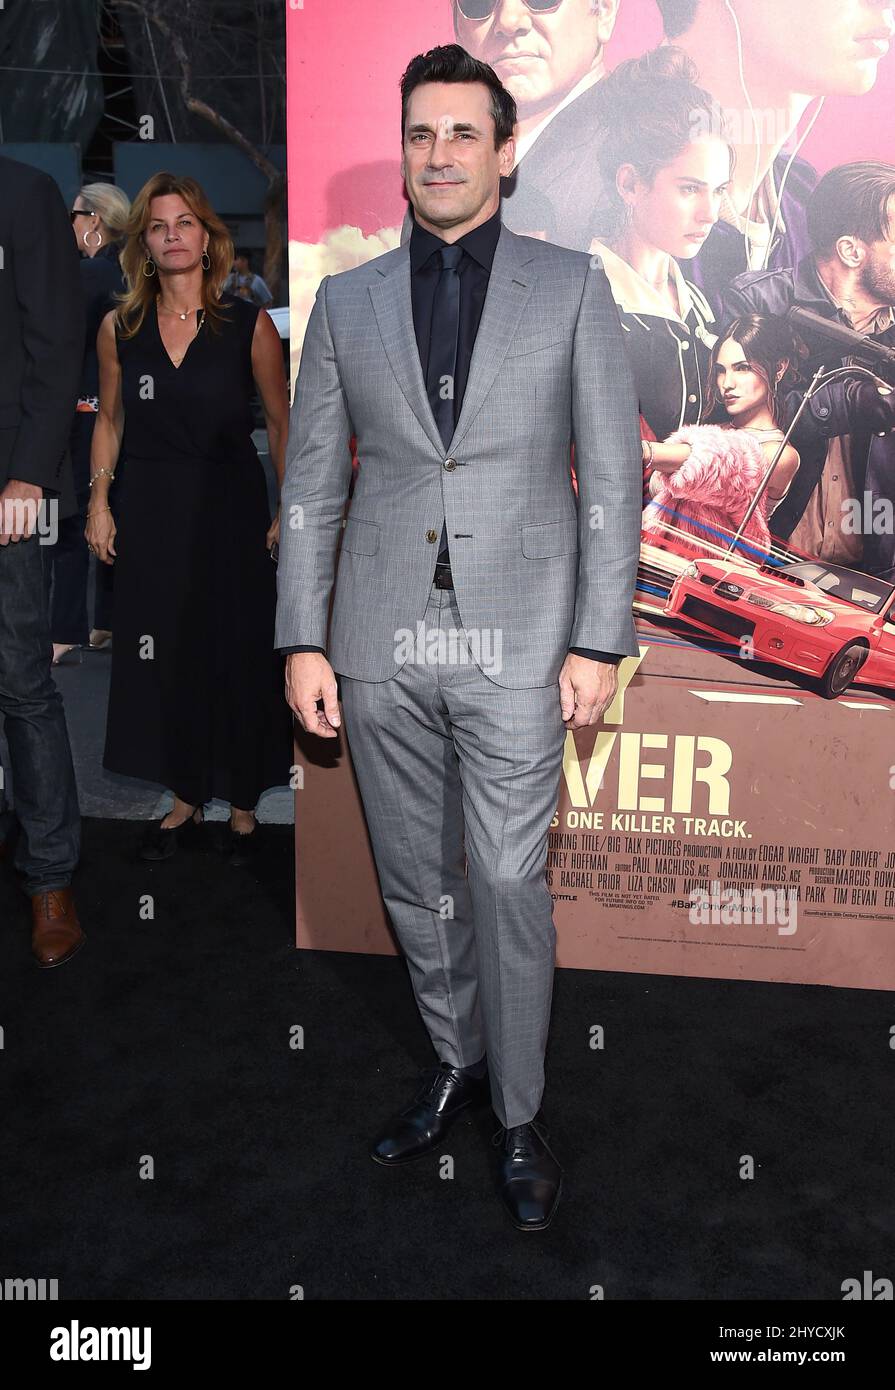 Jon Hamm attending 'The Baby Driver' premiere held at the Ace Hotel Downtown in Los Angeles, USA Stock Photo